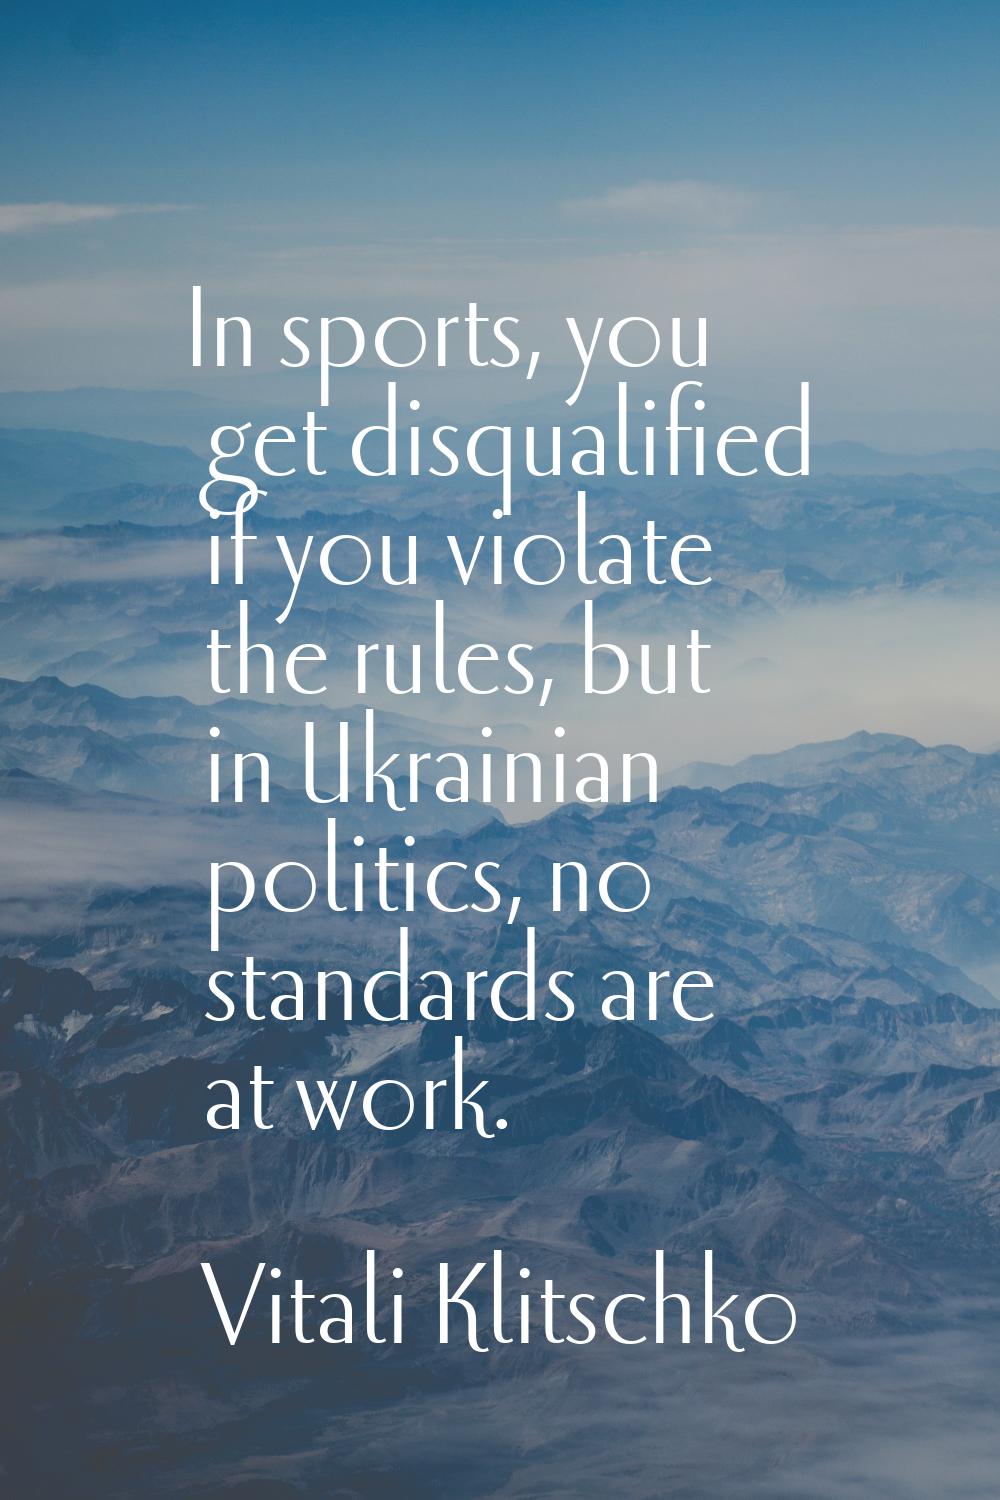 In sports, you get disqualified if you violate the rules, but in Ukrainian politics, no standards a